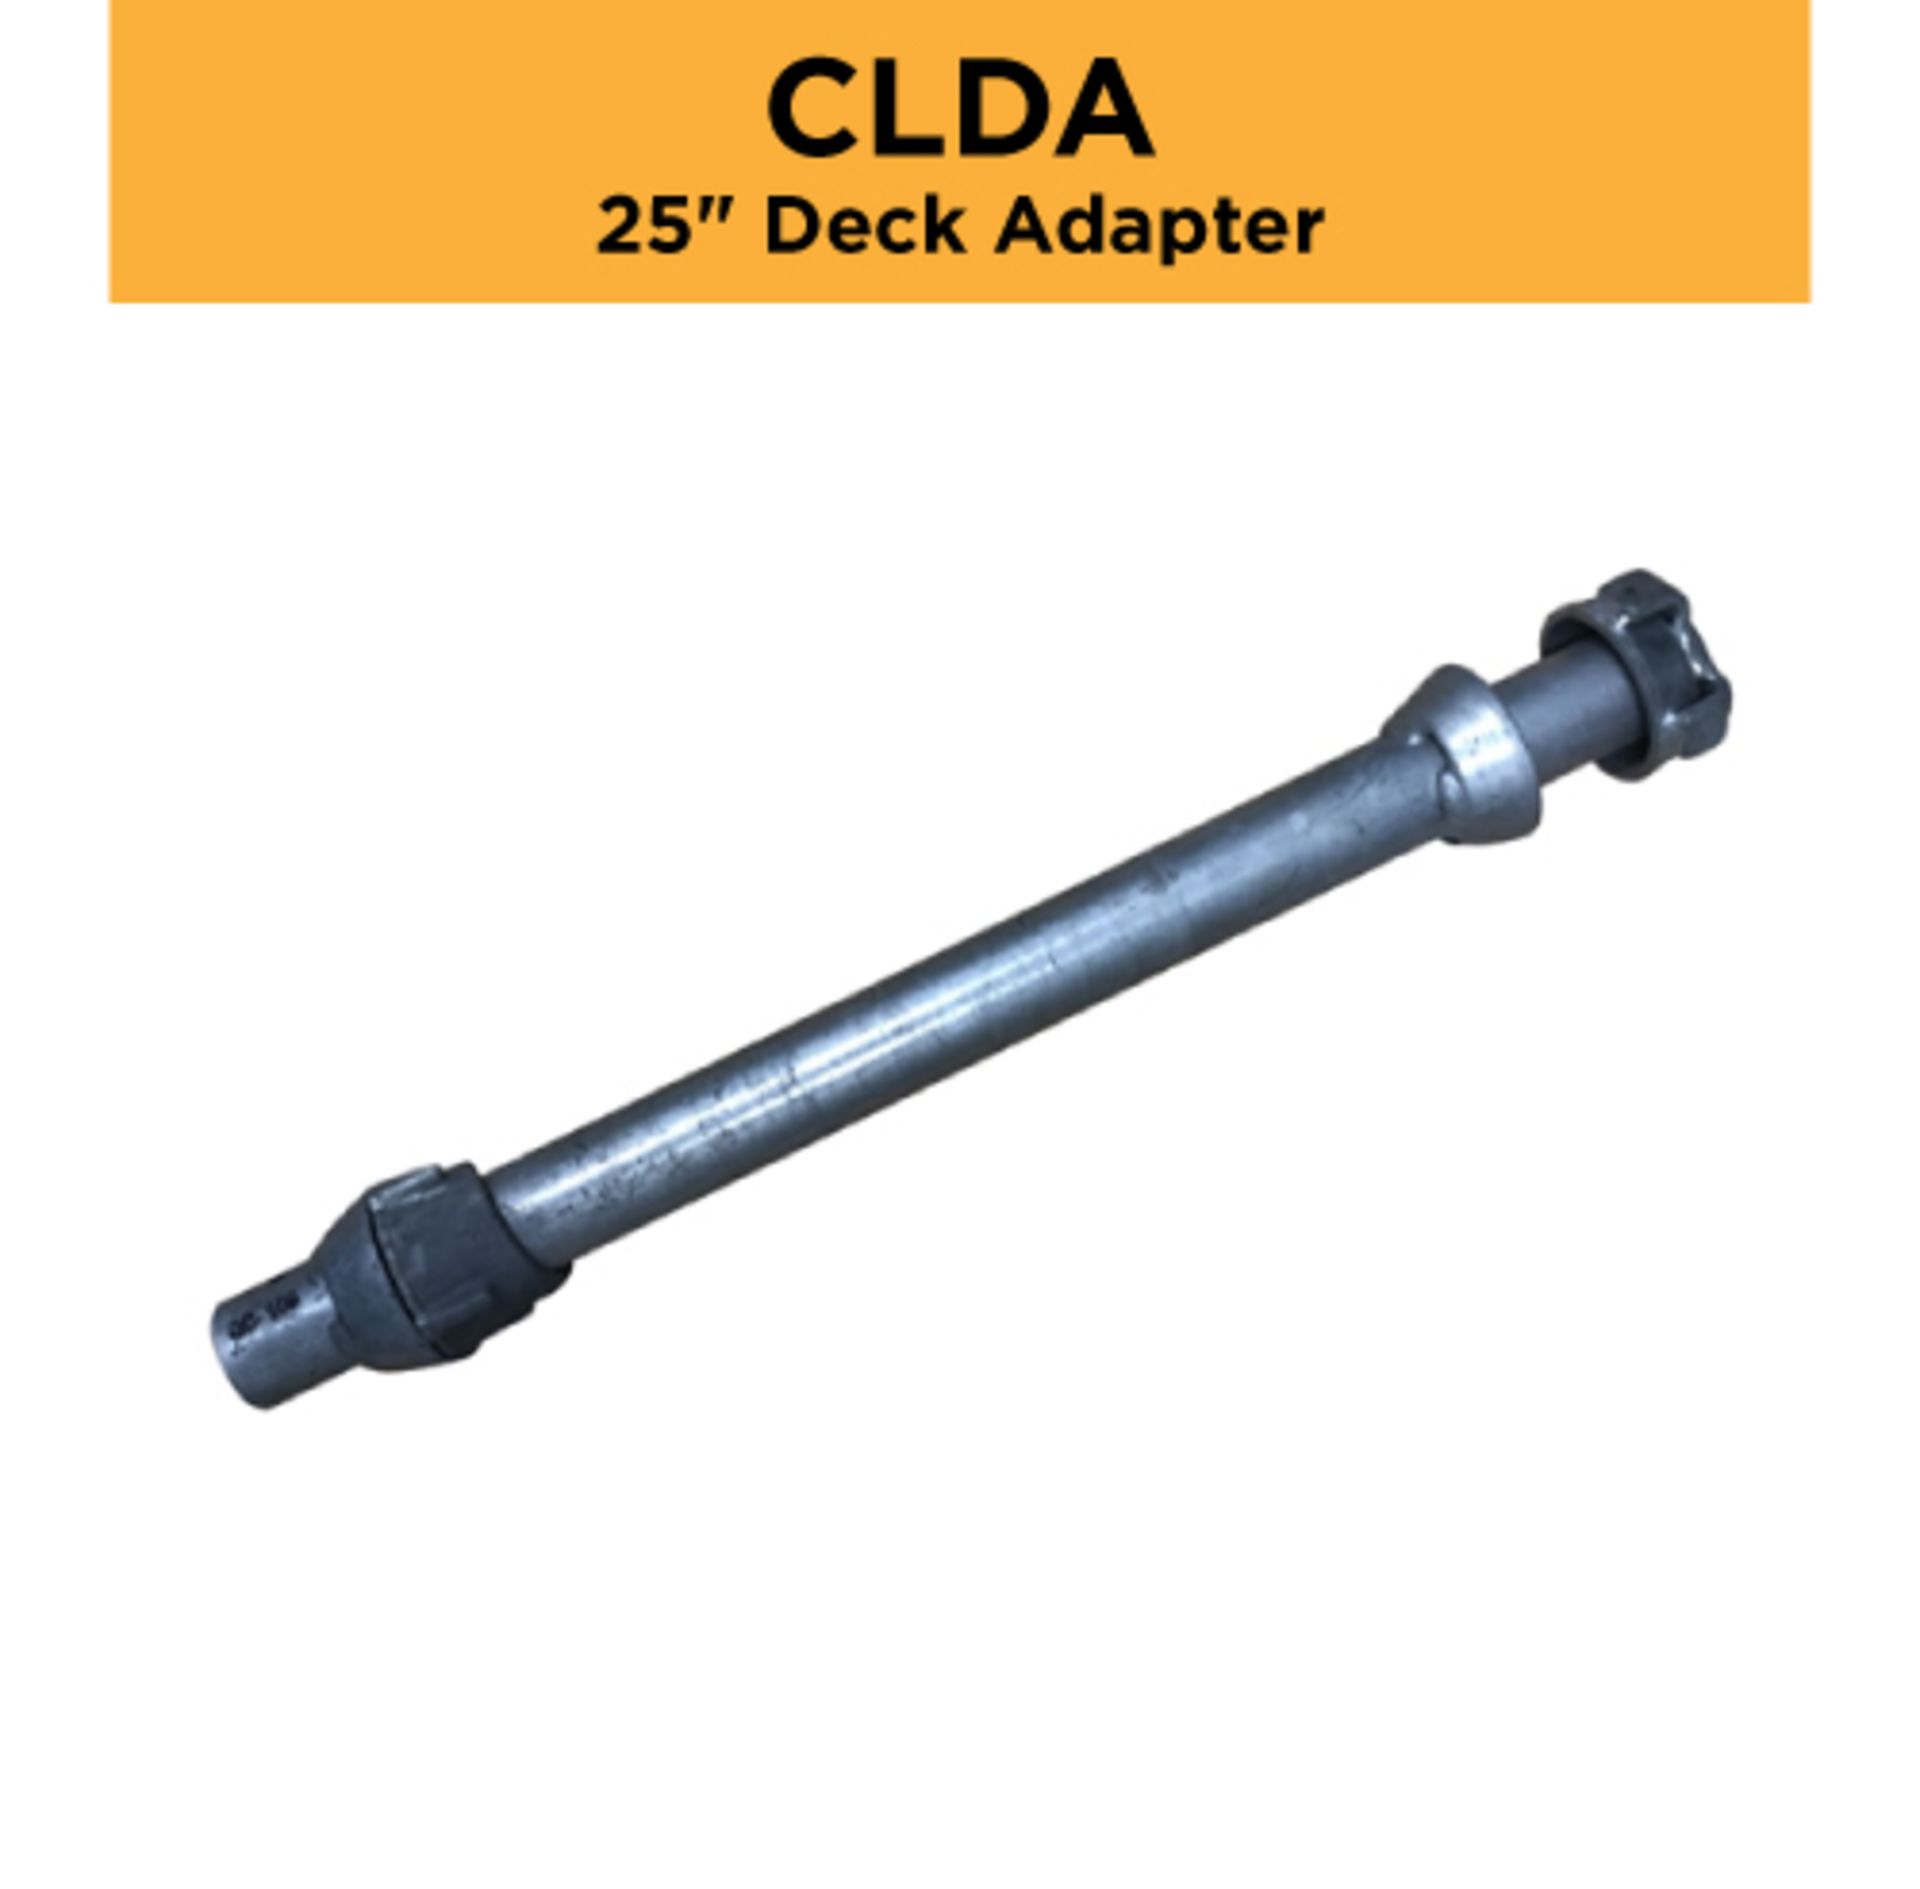 Lot of (250) 25" Deck Adapter - Type: CLDA - (1) Racks Per Lot - Approximate Weight: 3,000 Lbs; Tag: